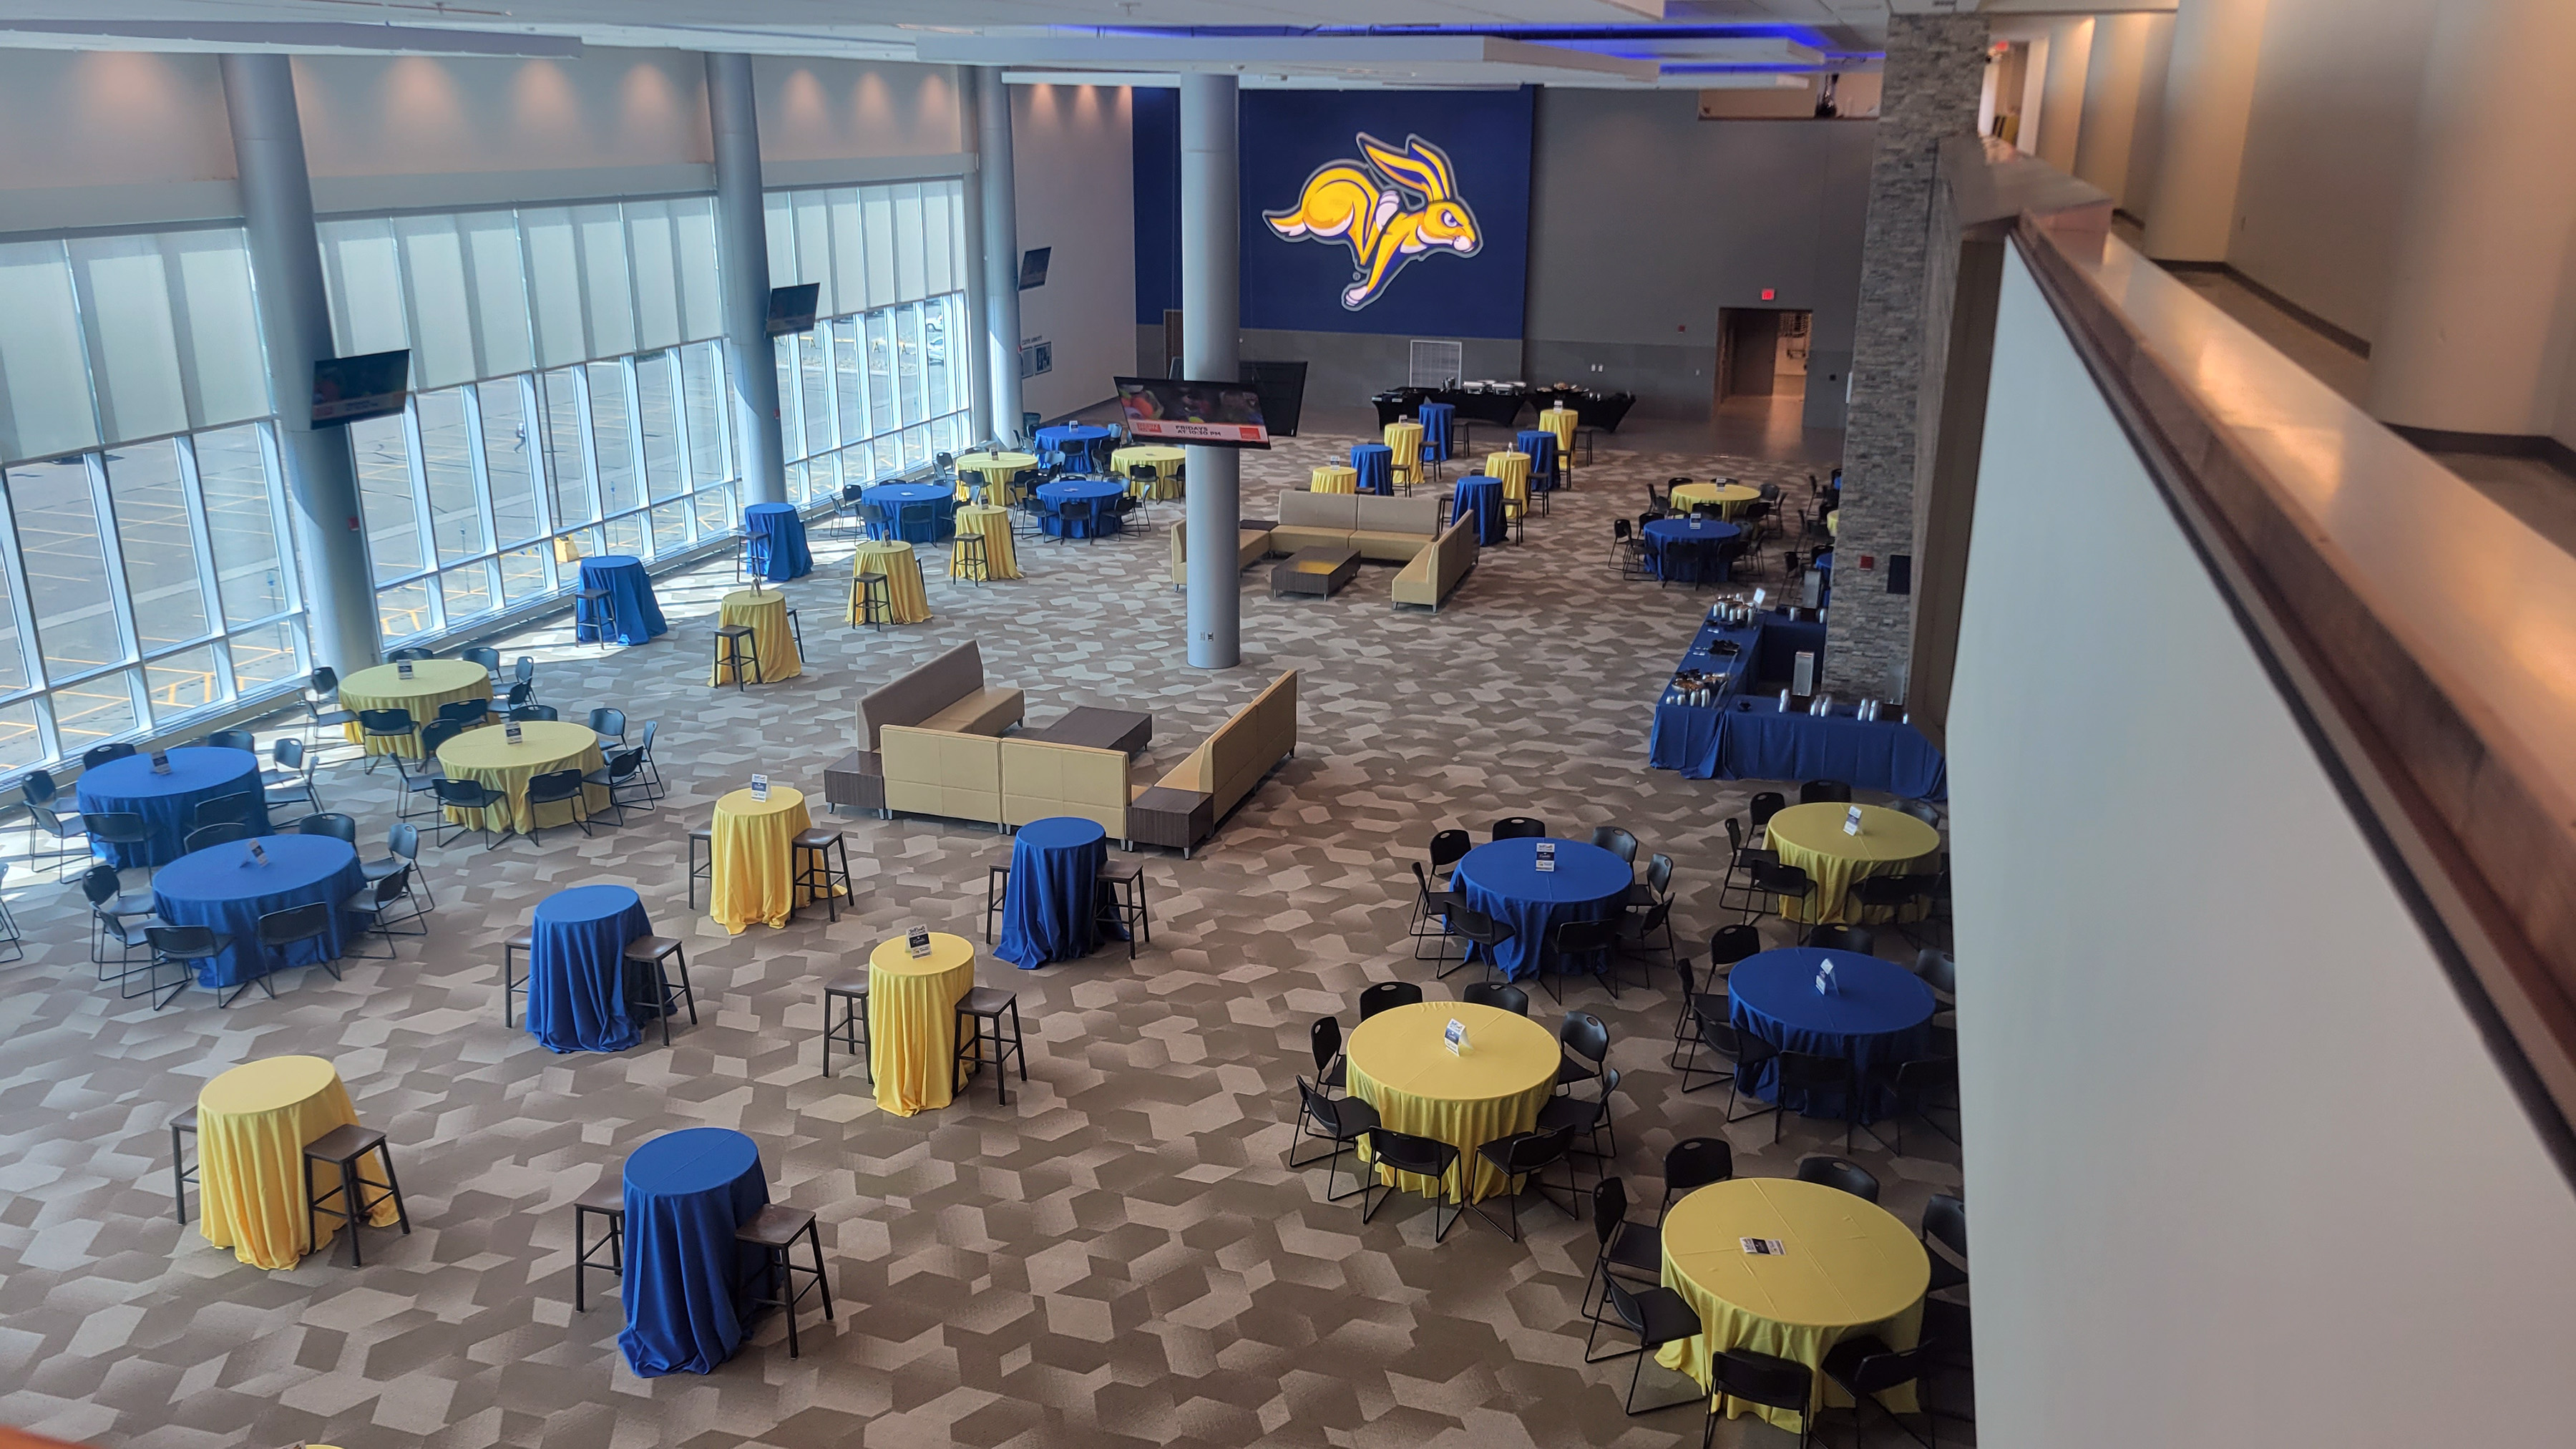 a room is pictured from above with round tables covered in blue and yellow tablecloths. a large picture of the SDSU jackrabbit logo is on the far wall